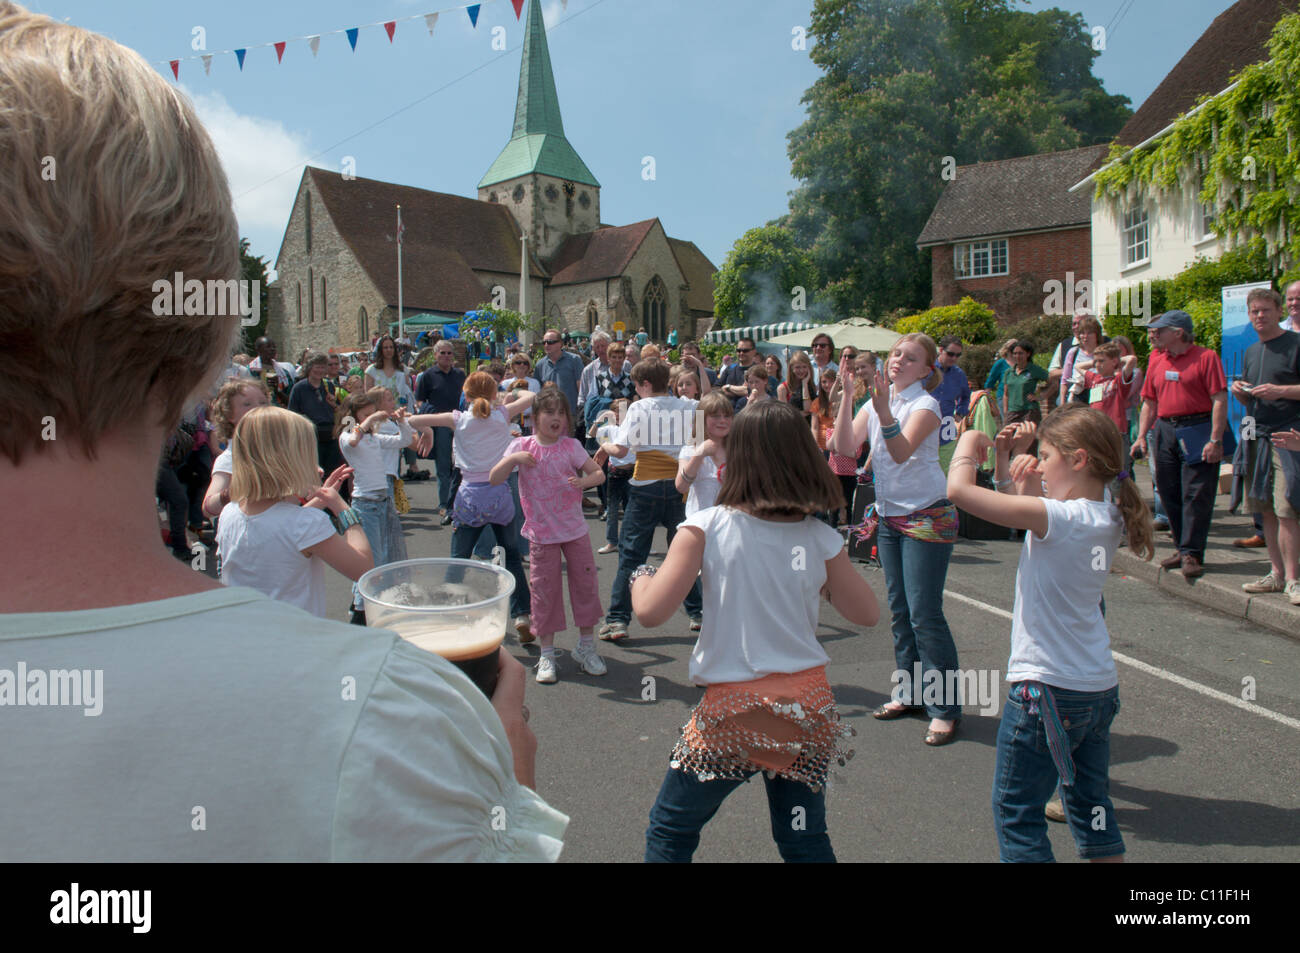 Harting Festivities. Fete held annually at May at South Harting, West Sussex, UK. Stock Photo